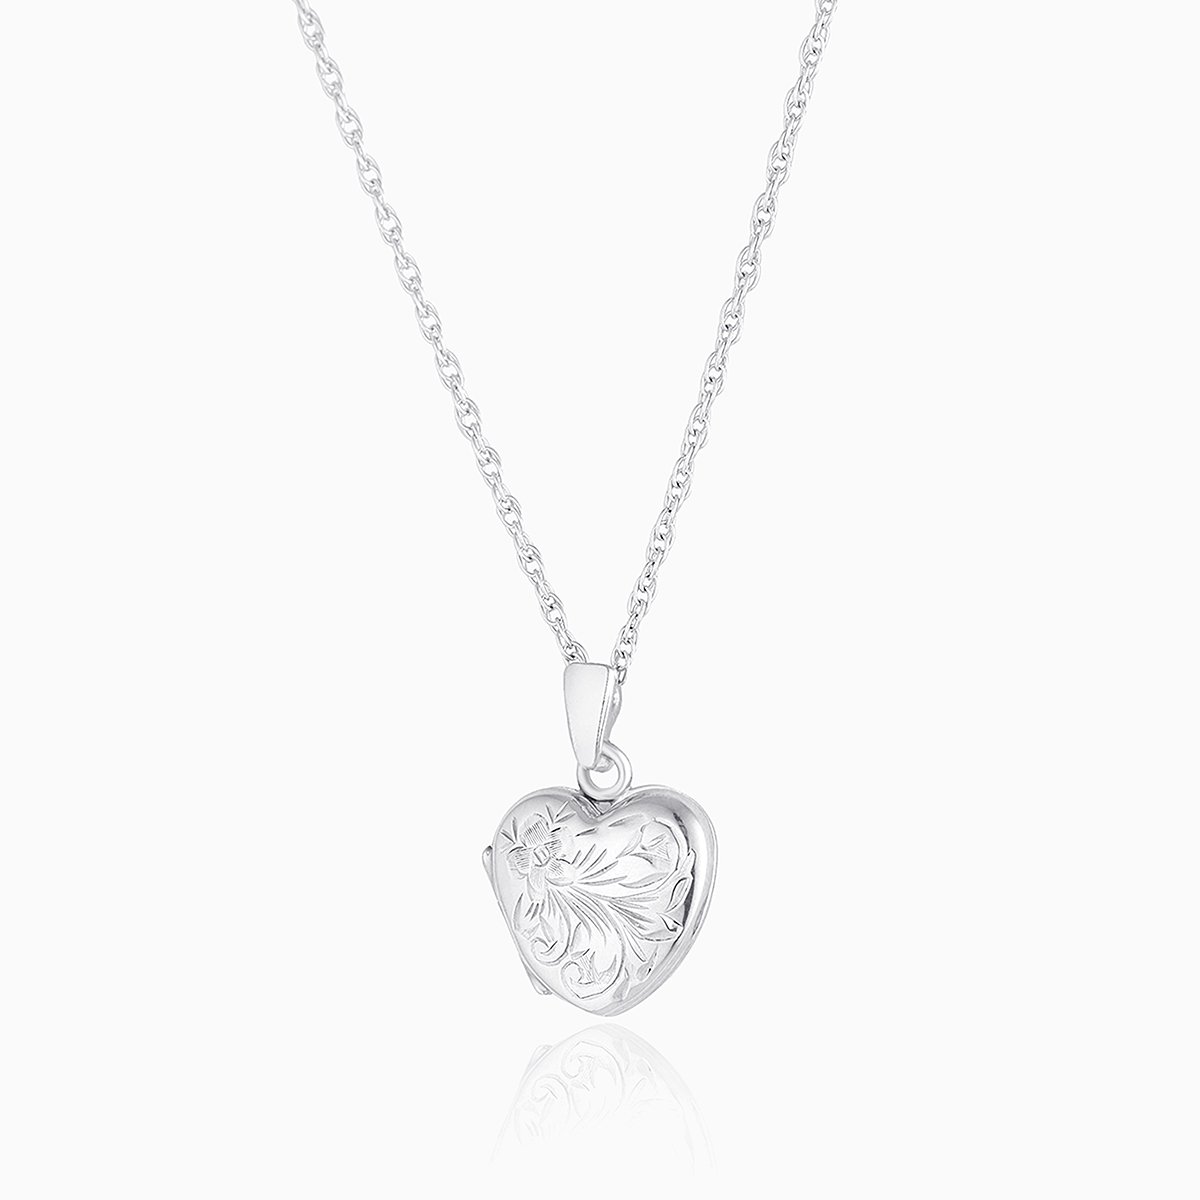 Petite 9 ct white gold heart locket engraved with a floral design on a 9 ct white gold chain